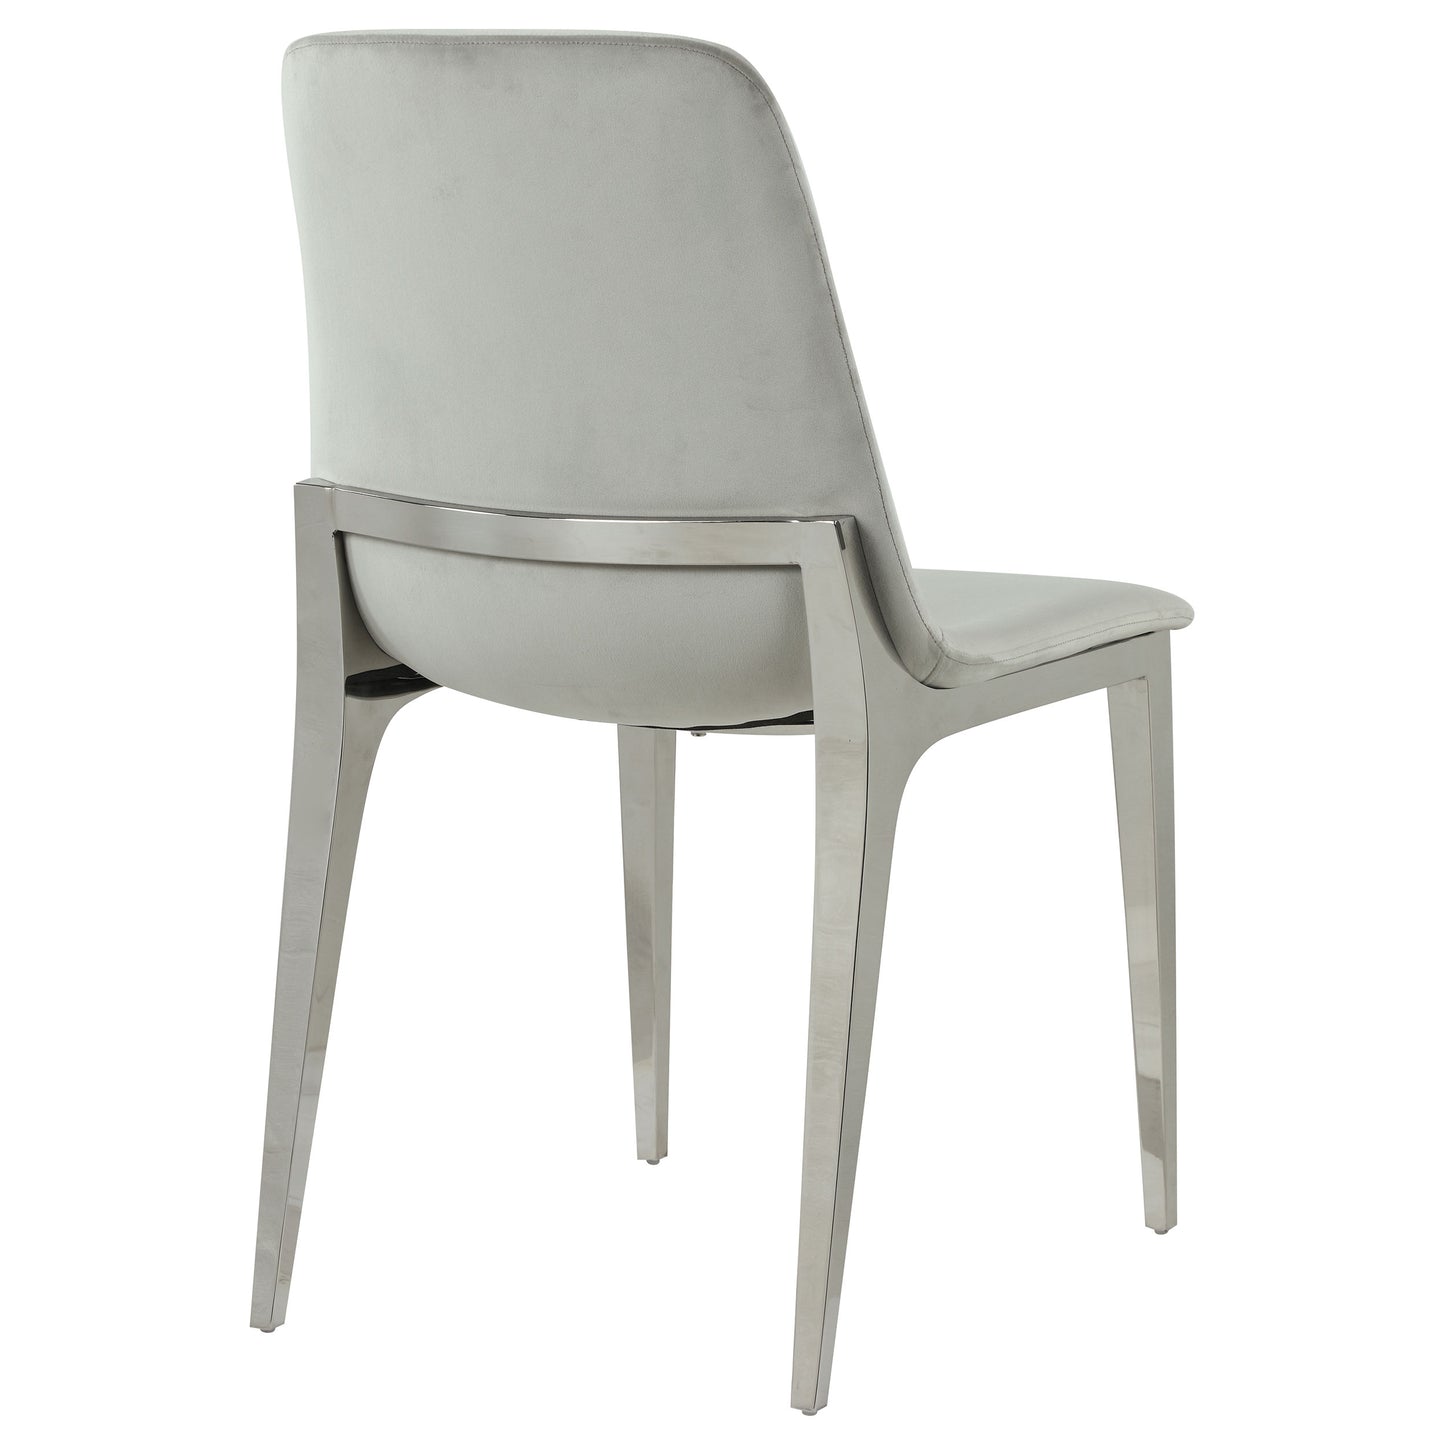 Irene Upholstered Side Chairs Light Grey and Chrome (Set of 4)